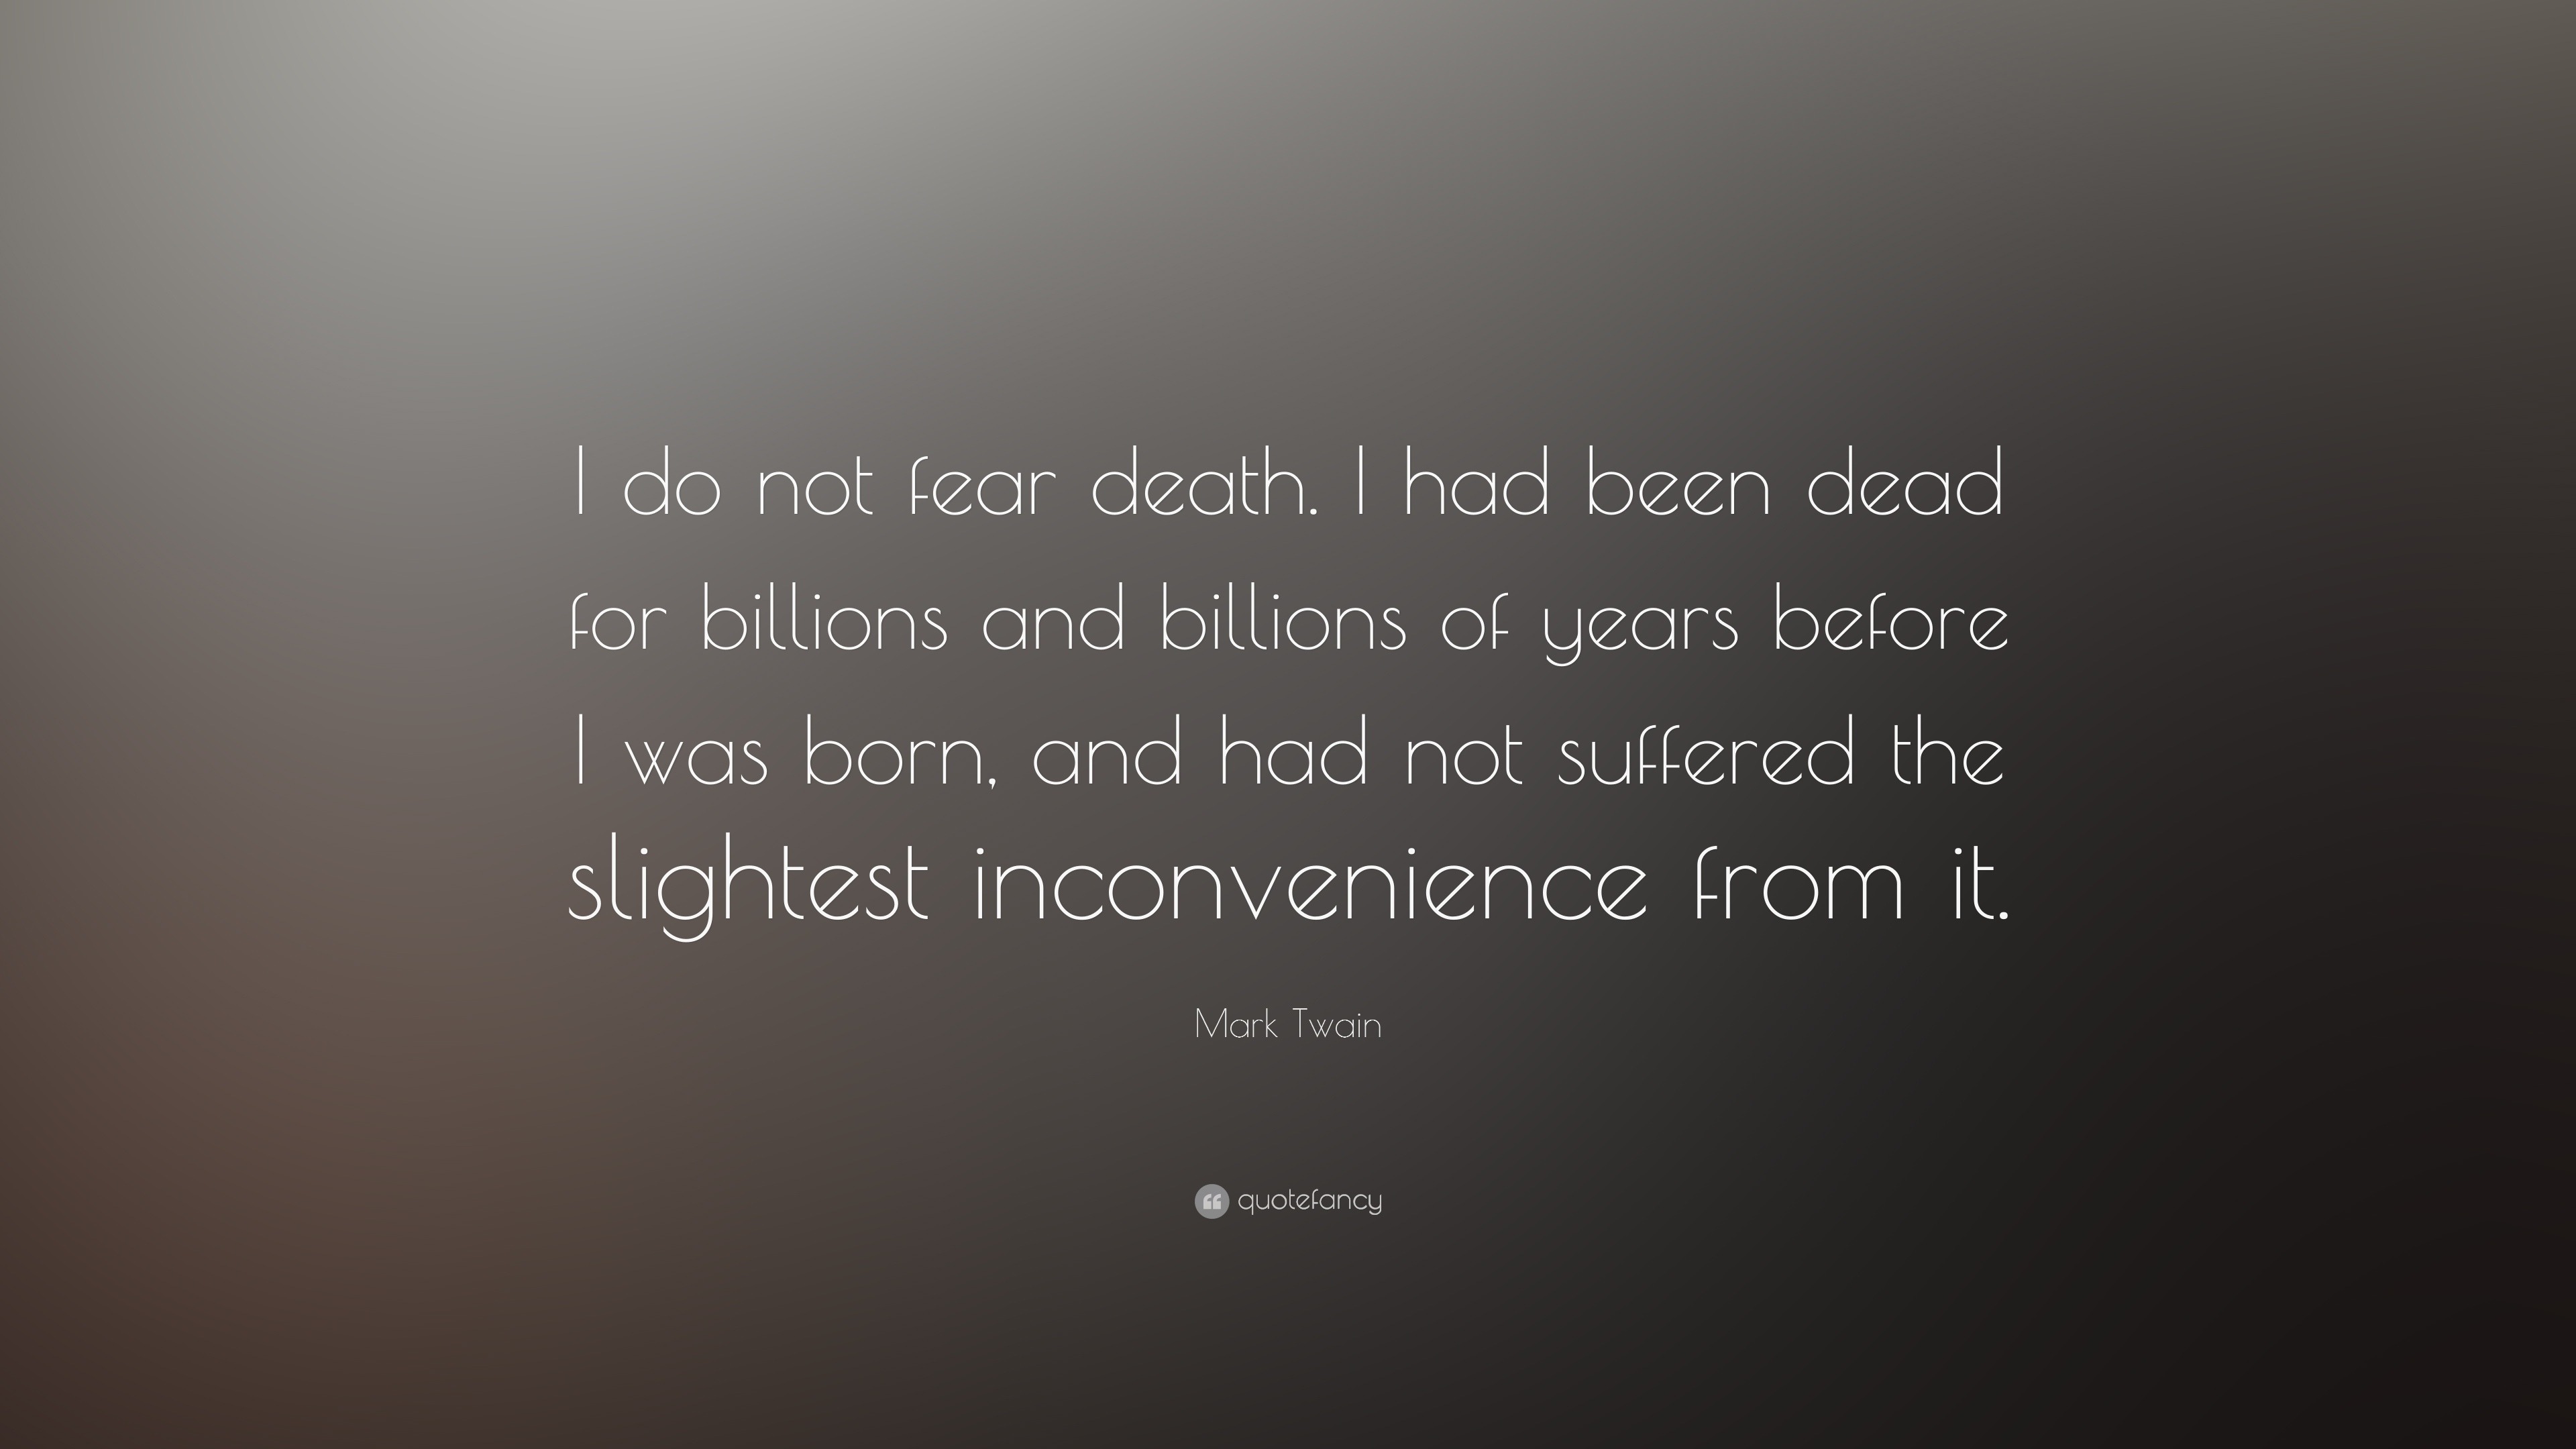 Mark Twain Quote “I do not fear I had been dead for